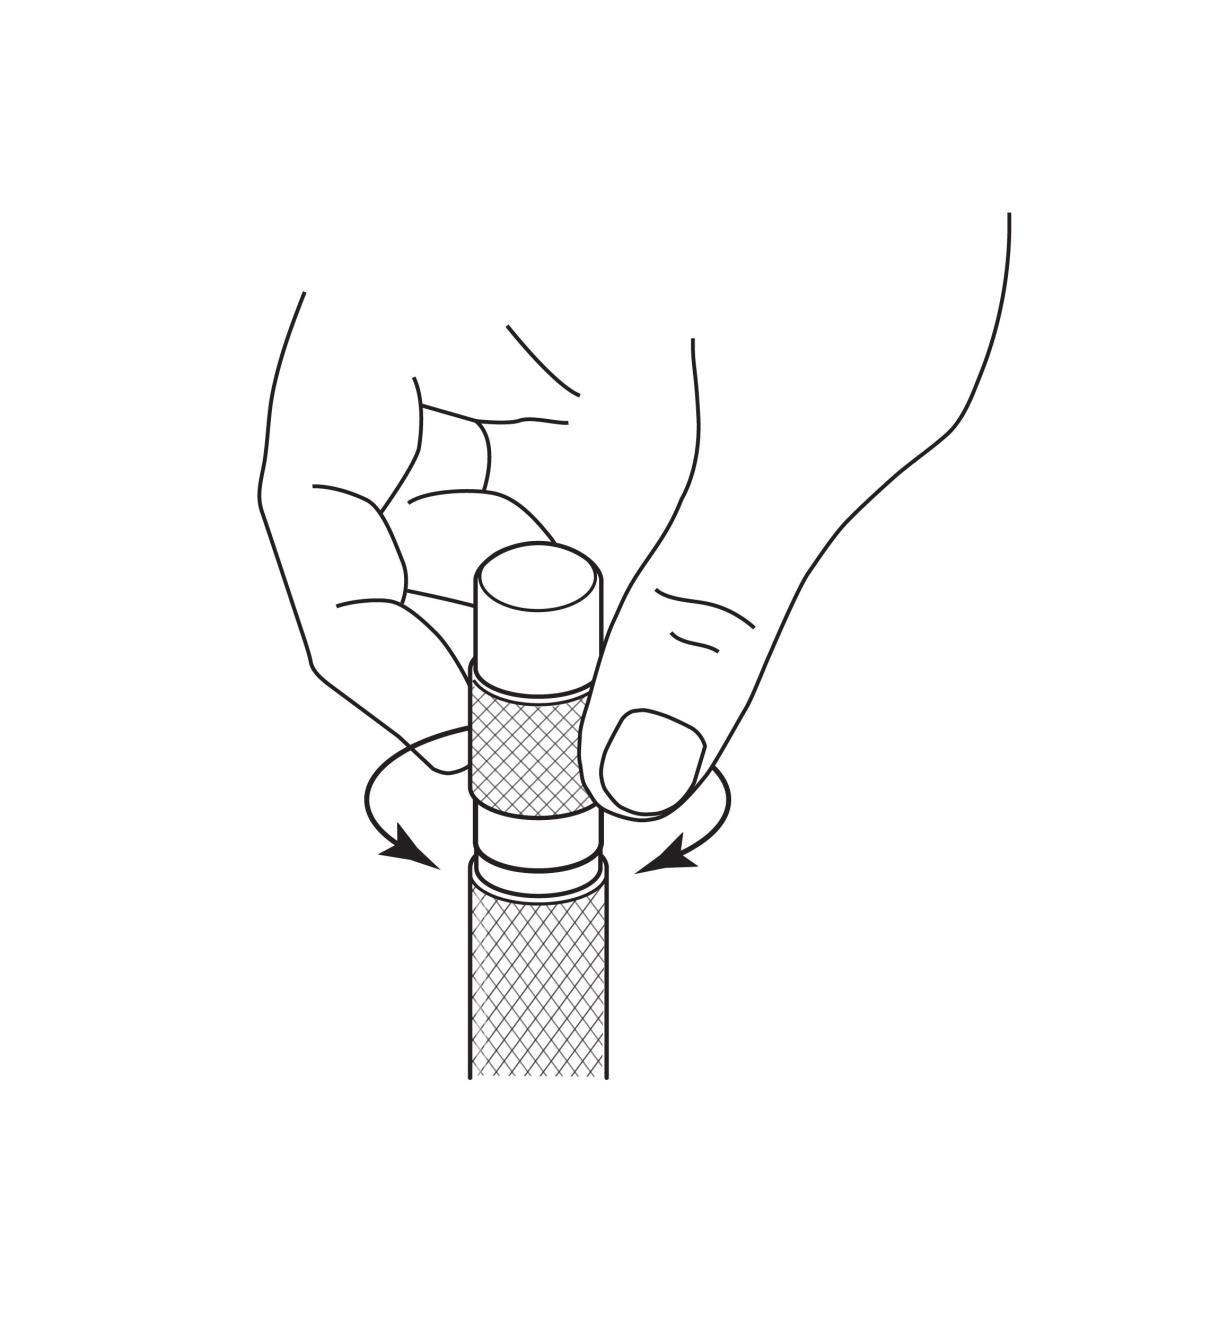 An illustration shows how to adjust the cap by twisting it